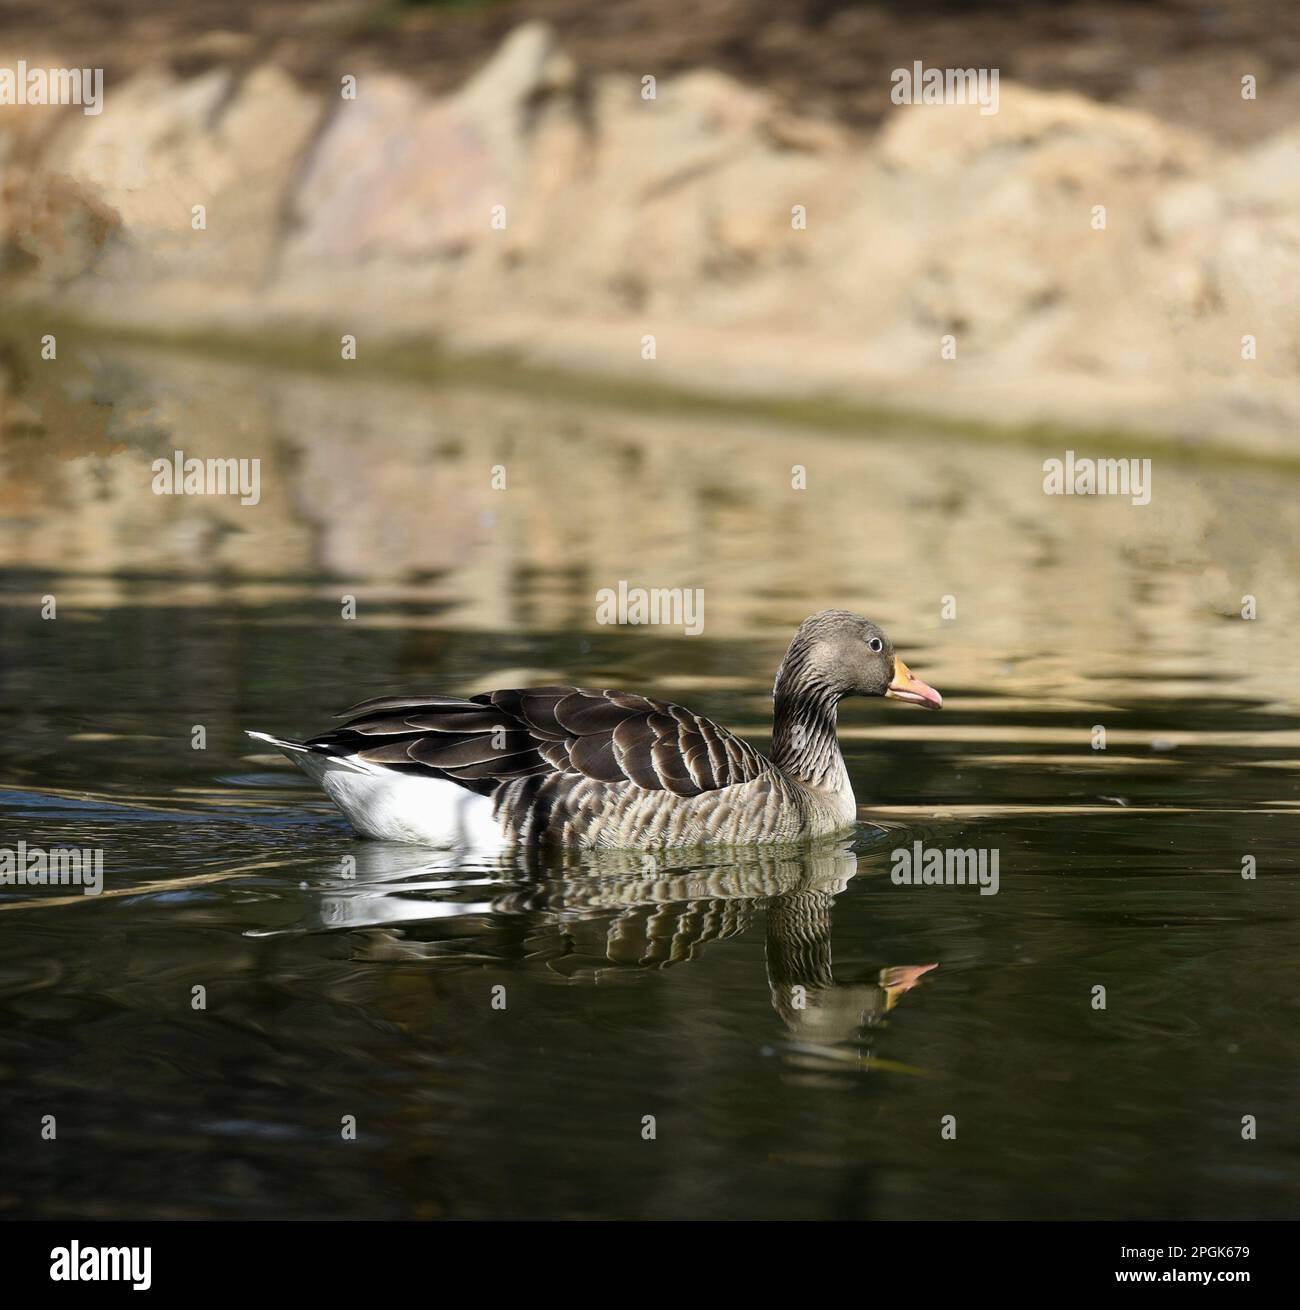 Natural landscape with view of a Canada goose (Branta canadensis) swimming in a pond. Stock Photo